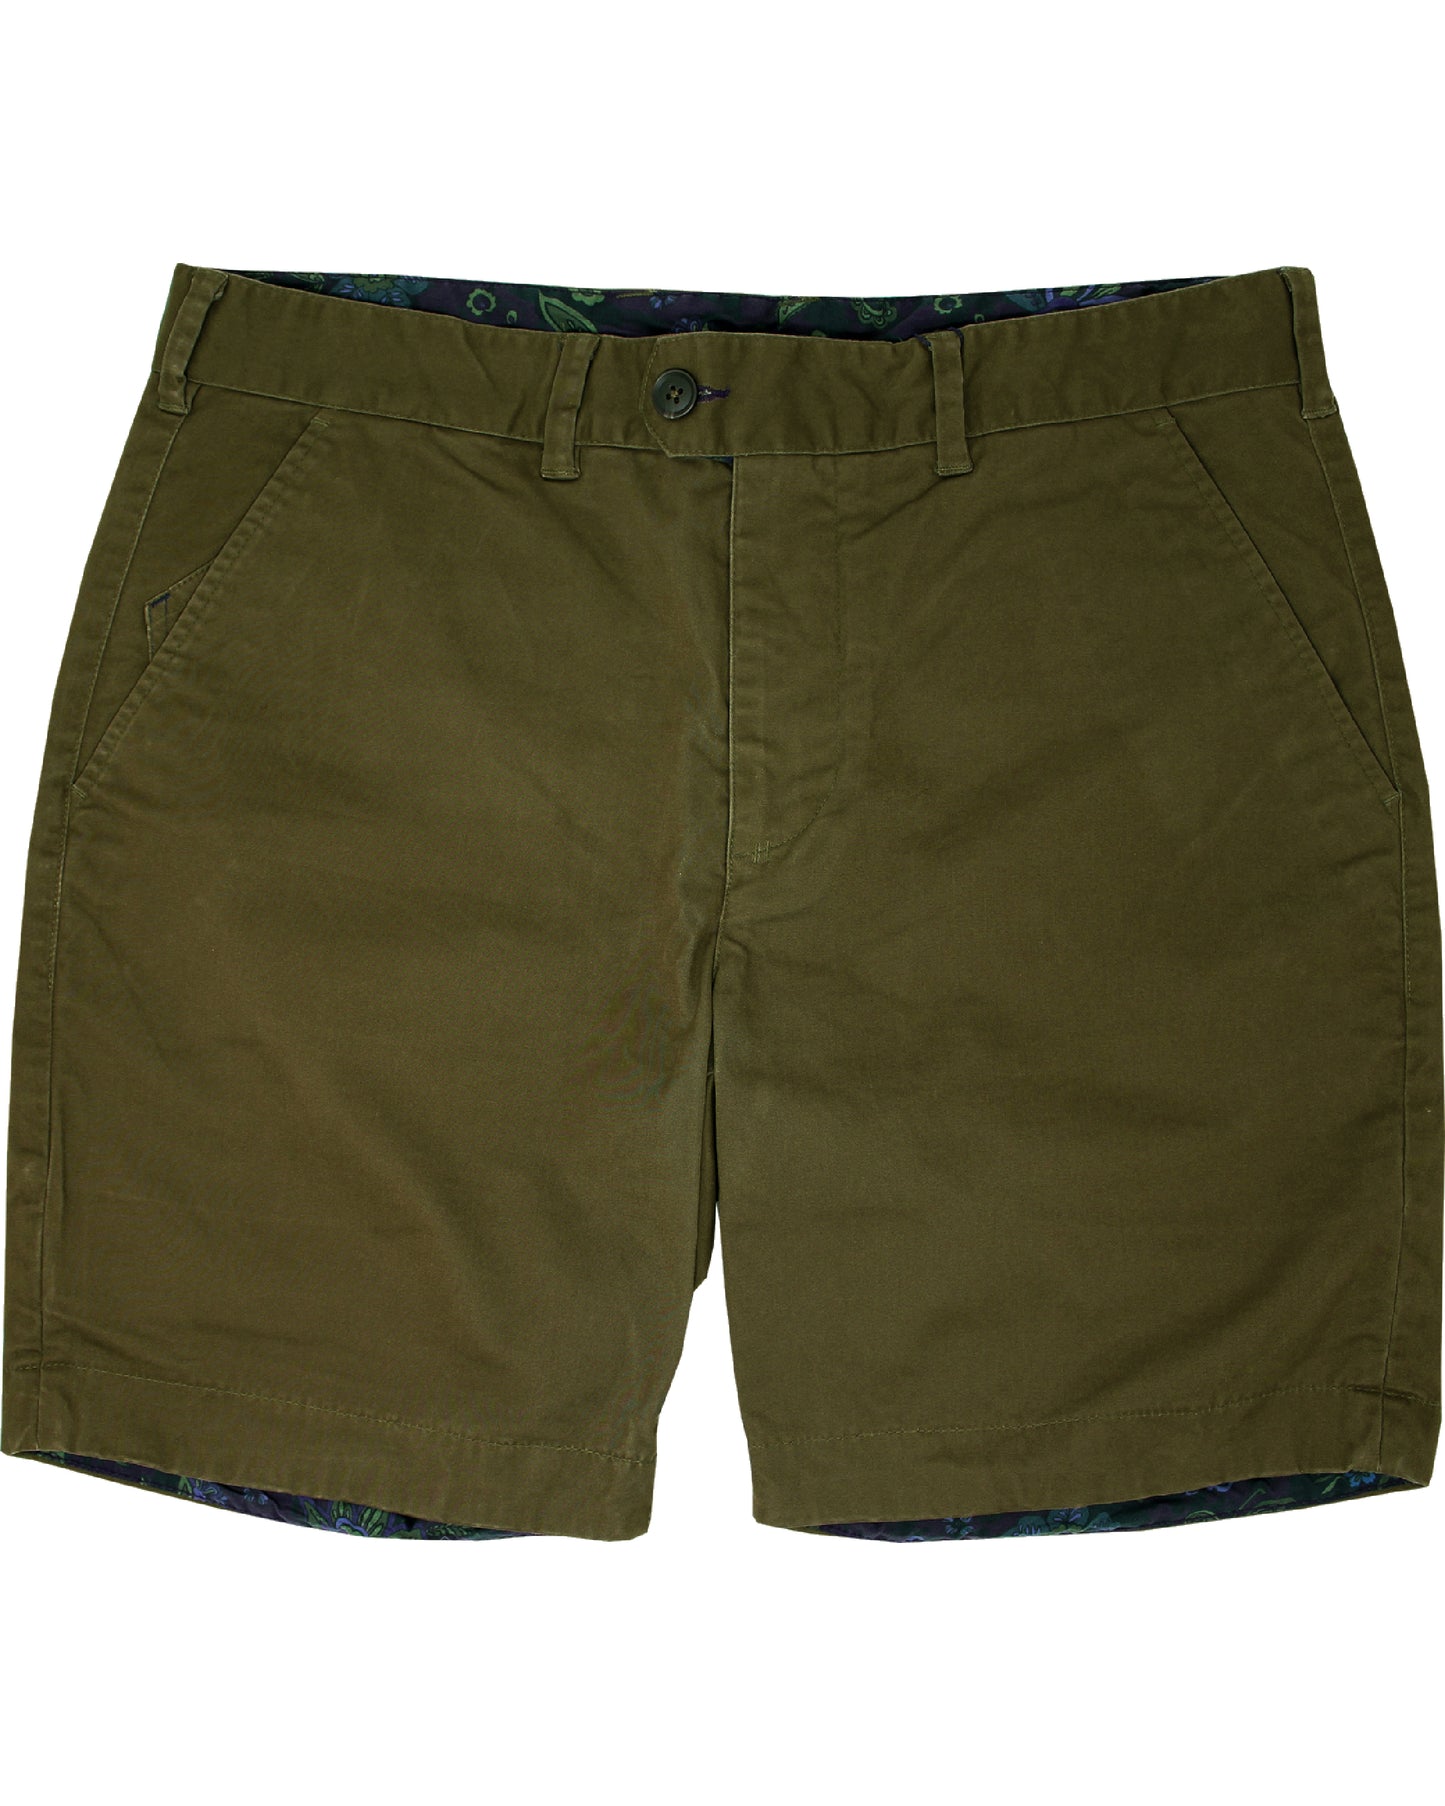 John Lux Taupe Shorts